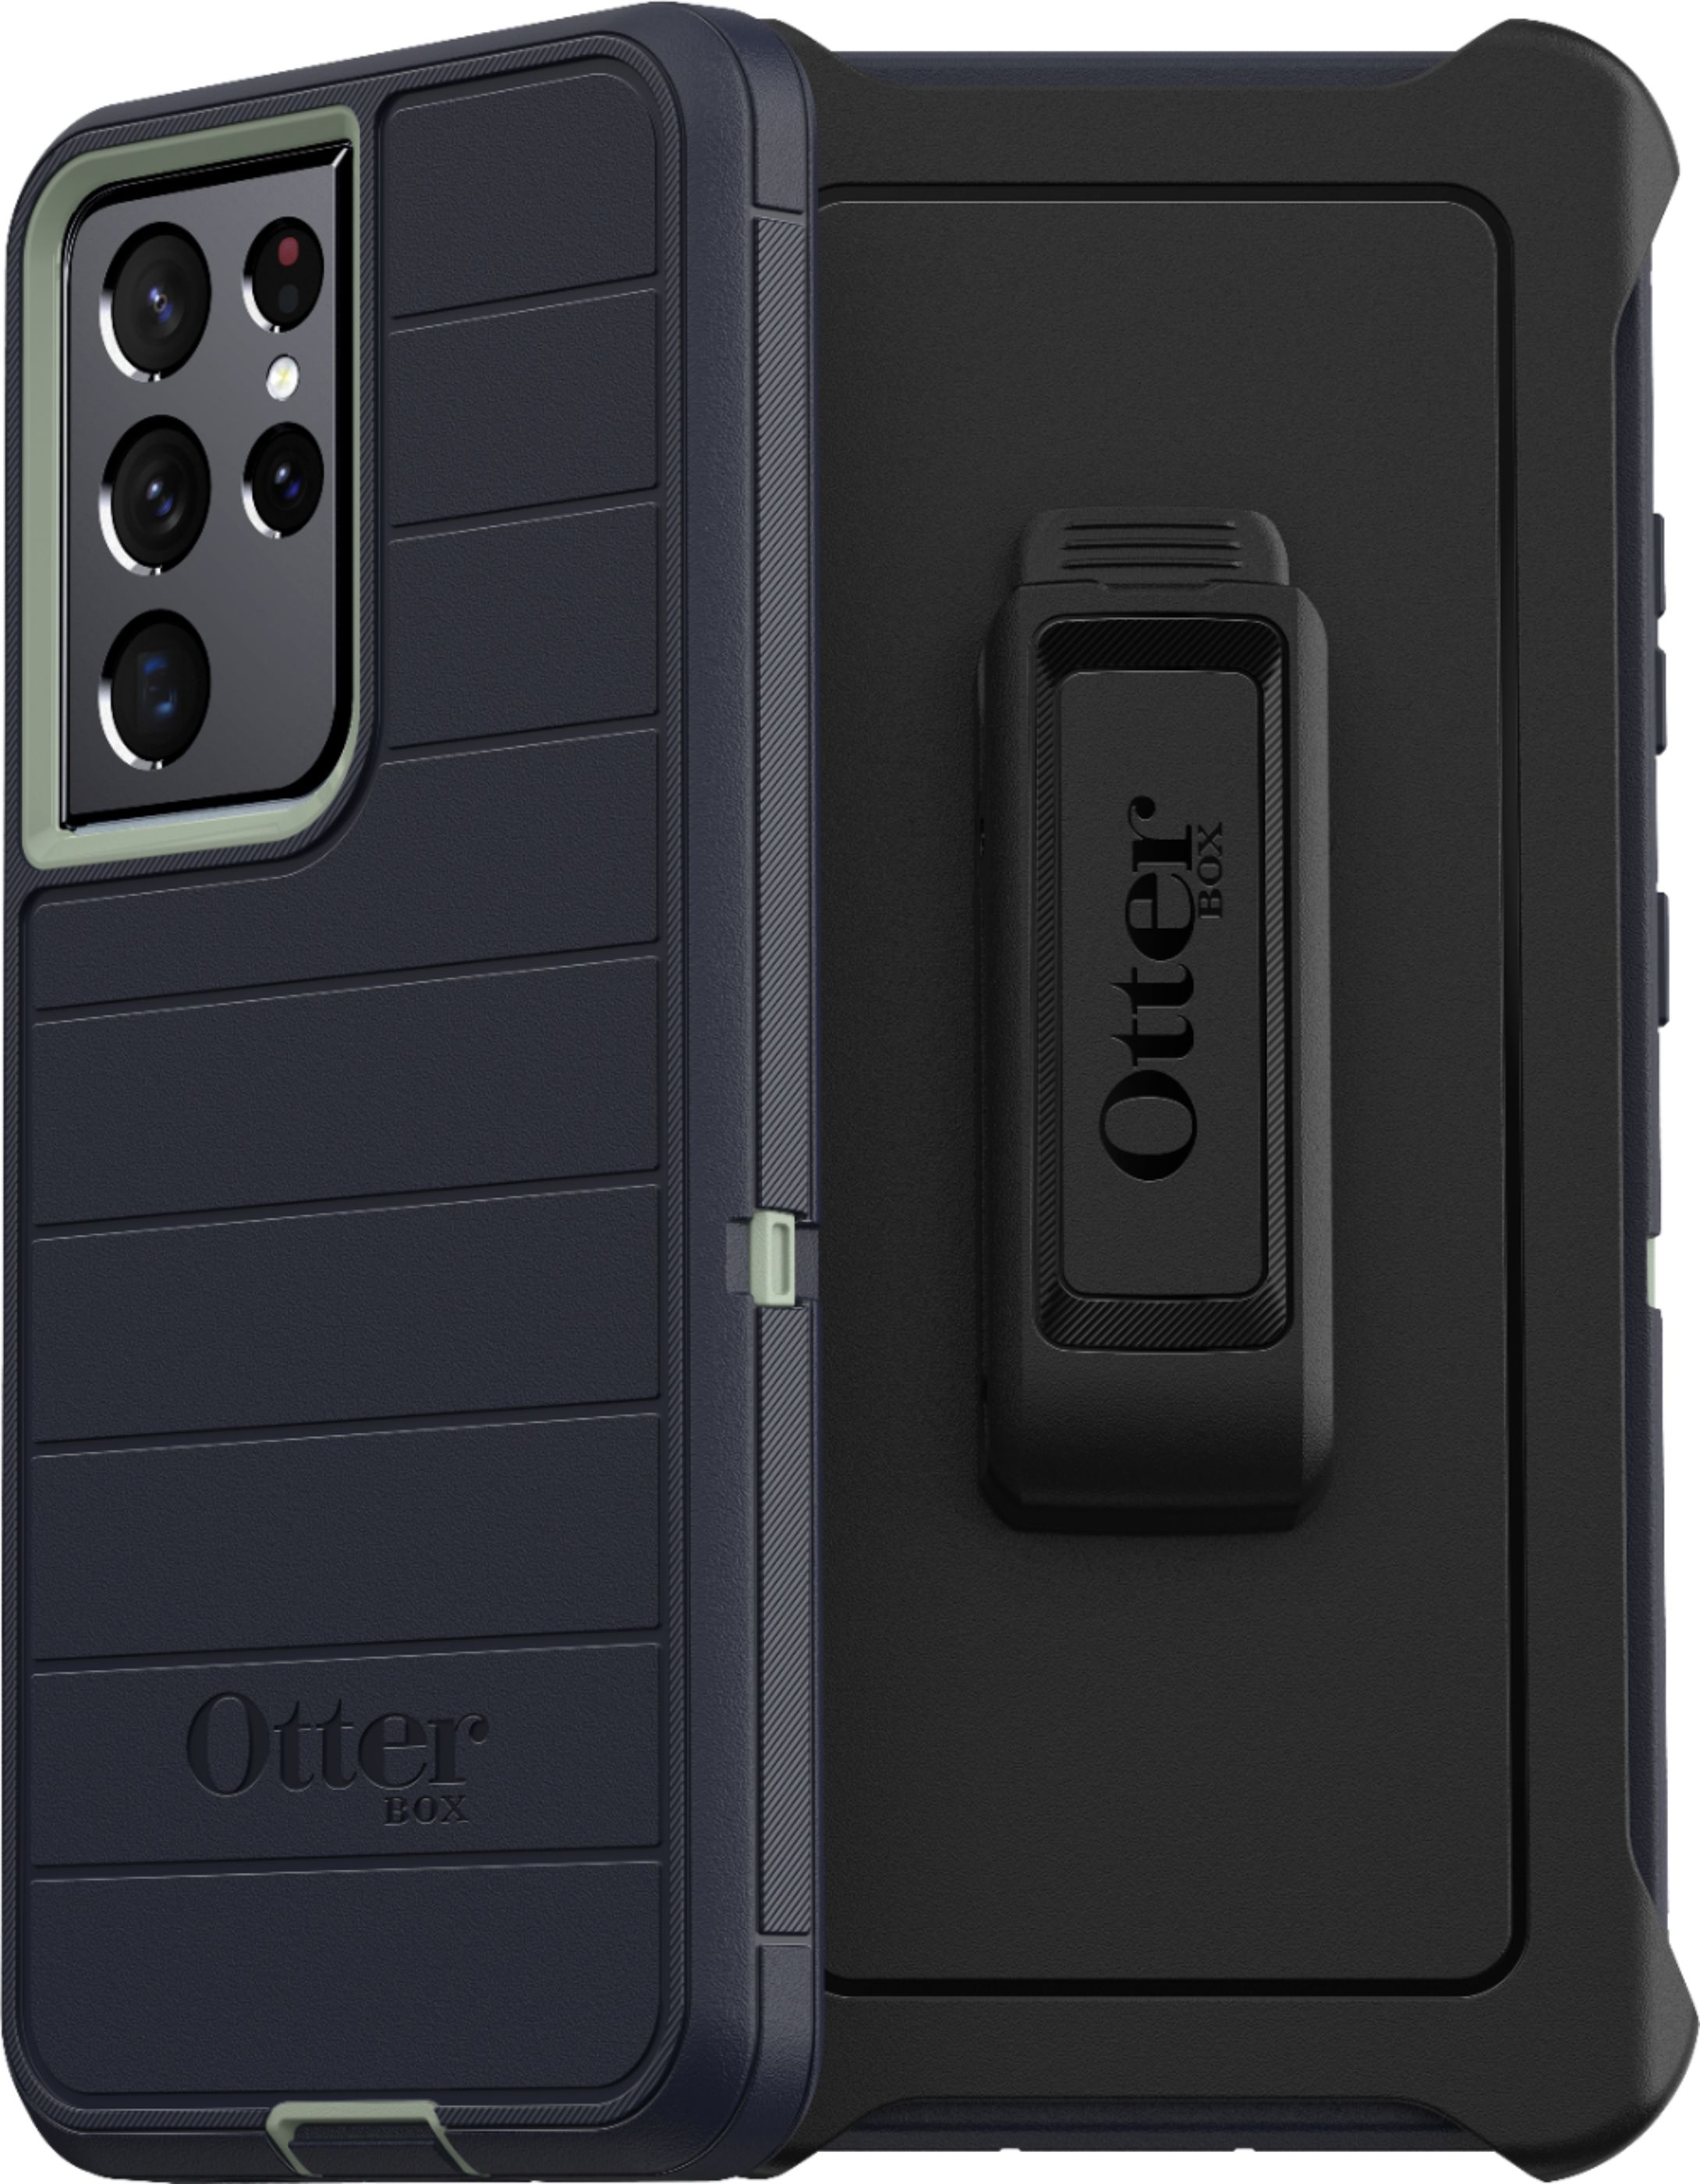 Angle View: OtterBox - Defender Series Pro for Samsung Galaxy S21 Ultra 5G - Varsity Blues